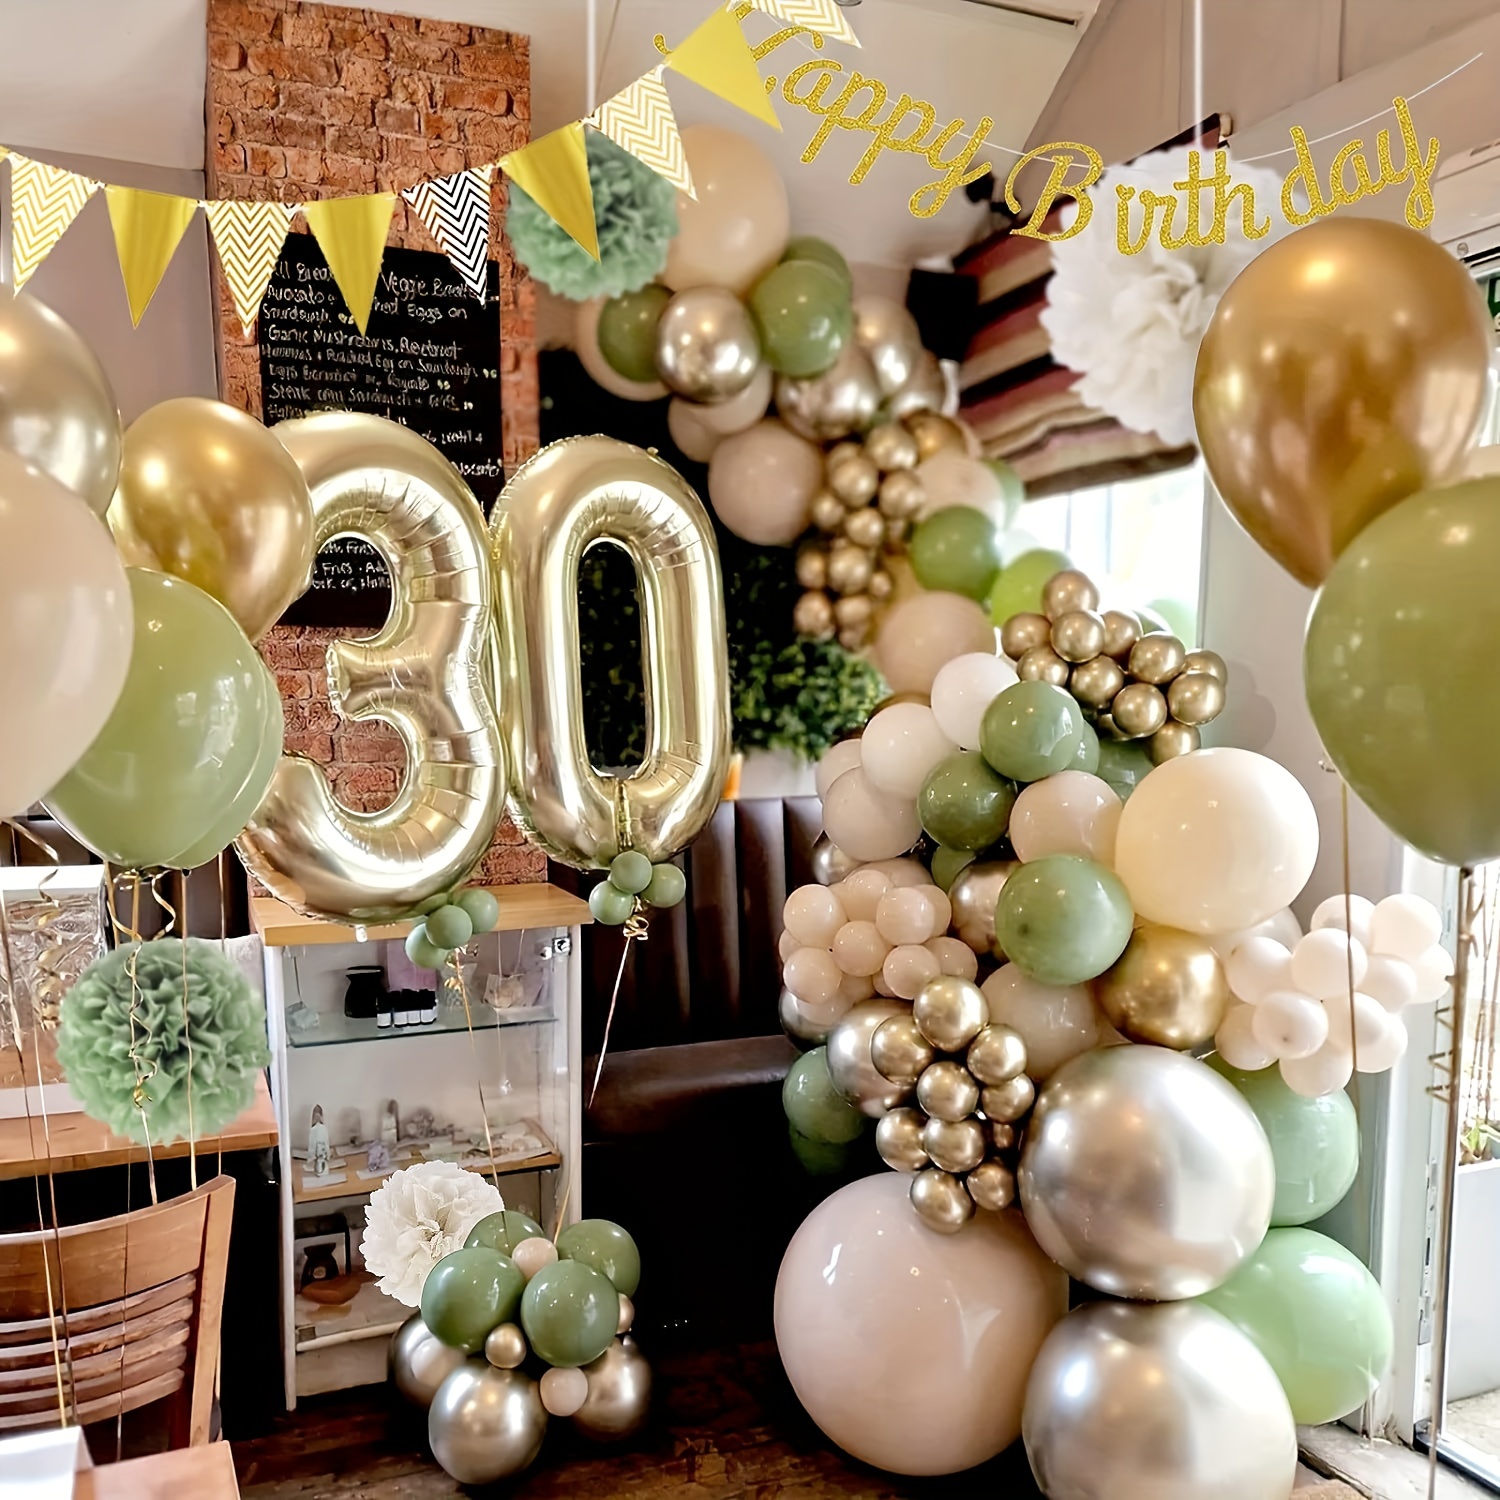  Birthday Decorations, Green Gold Birthday Party Decorations for  Boy Girls Men Women, Birthday Balloons with Happy Birthday Banner, Paper  Pompoms, Confetti Balloons for Birthday Party Decorations : Toys & Games